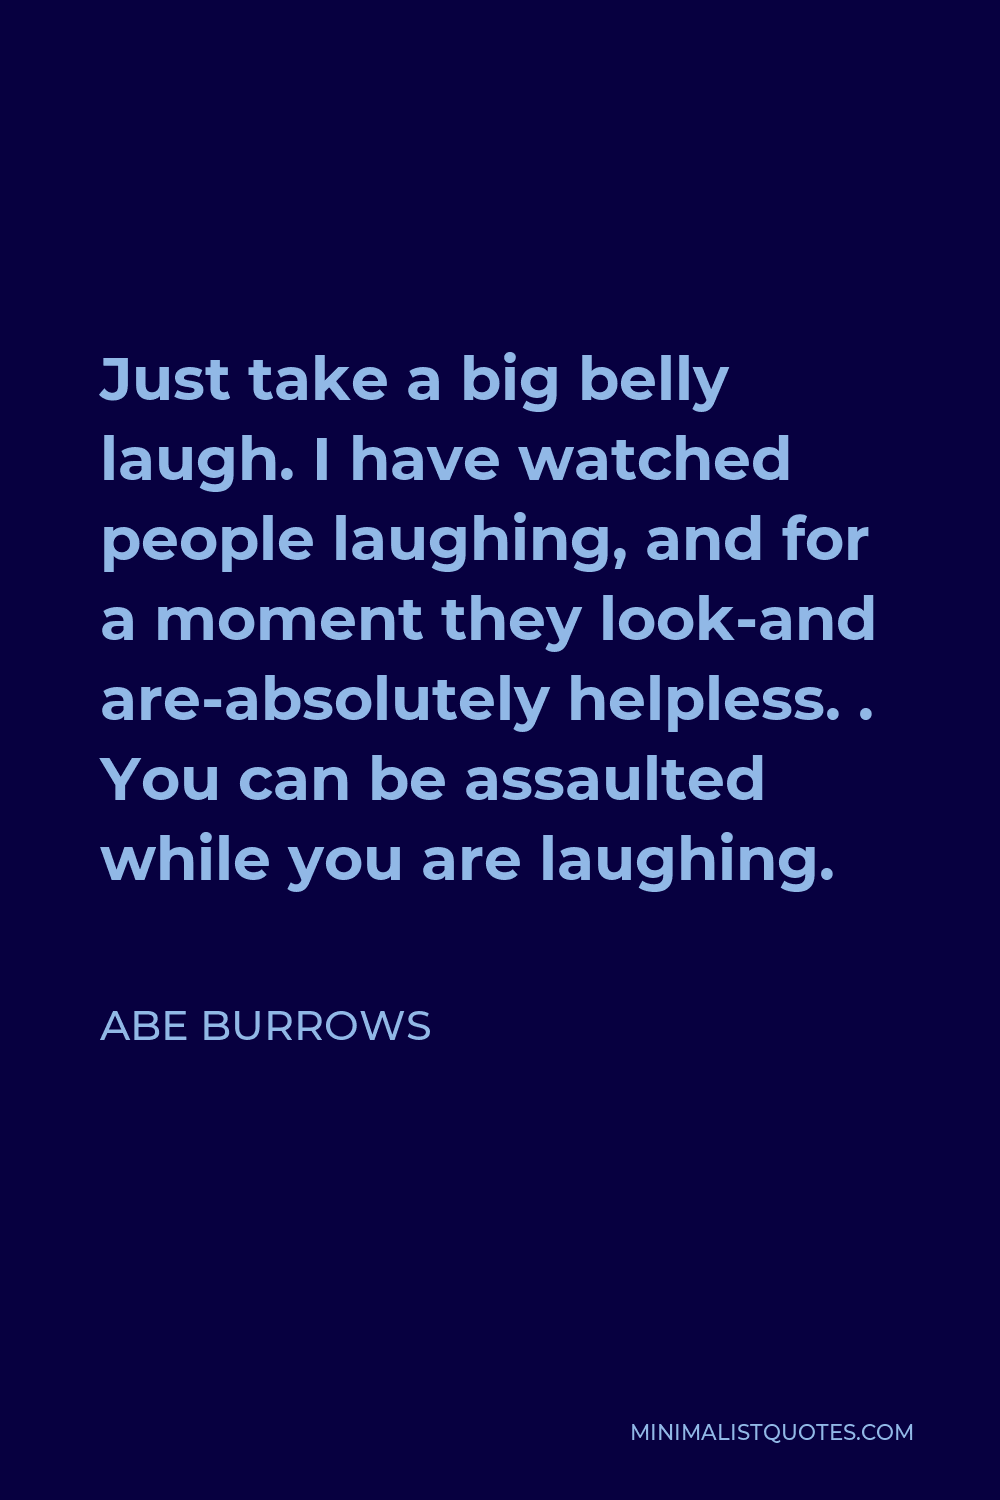 Abe Burrows Quote - Just take a big belly laugh. I have watched people laughing, and for a moment they look-and are-absolutely helpless. . You can be assaulted while you are laughing.